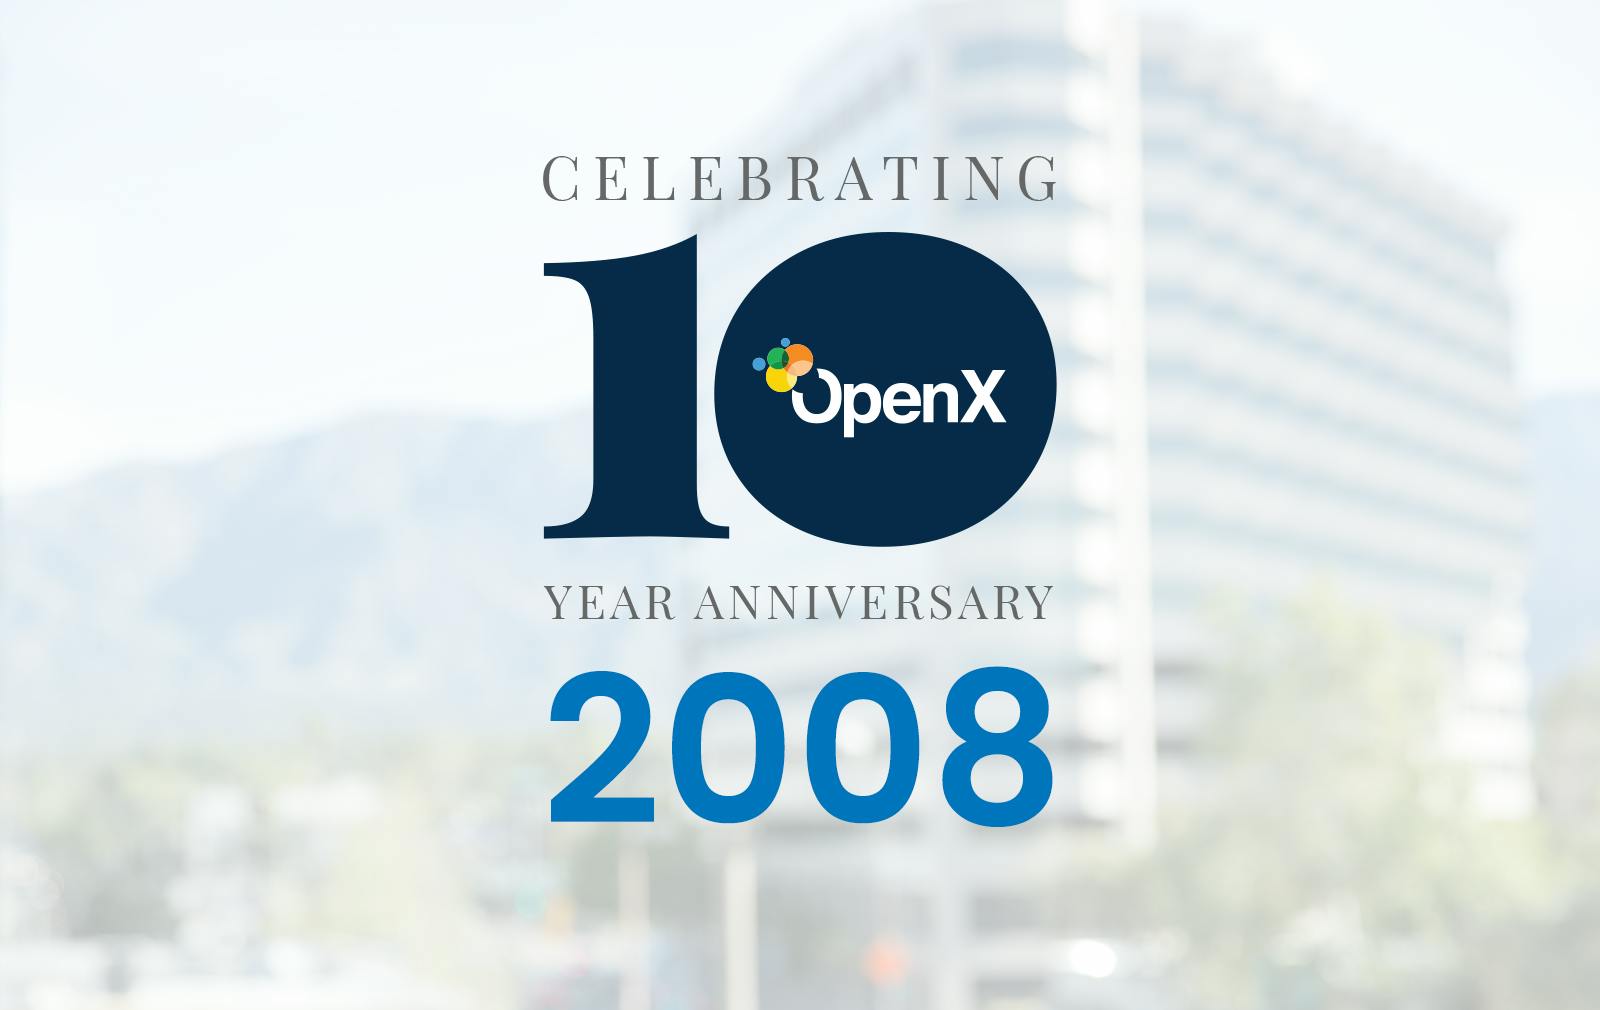 OpenX in 2008